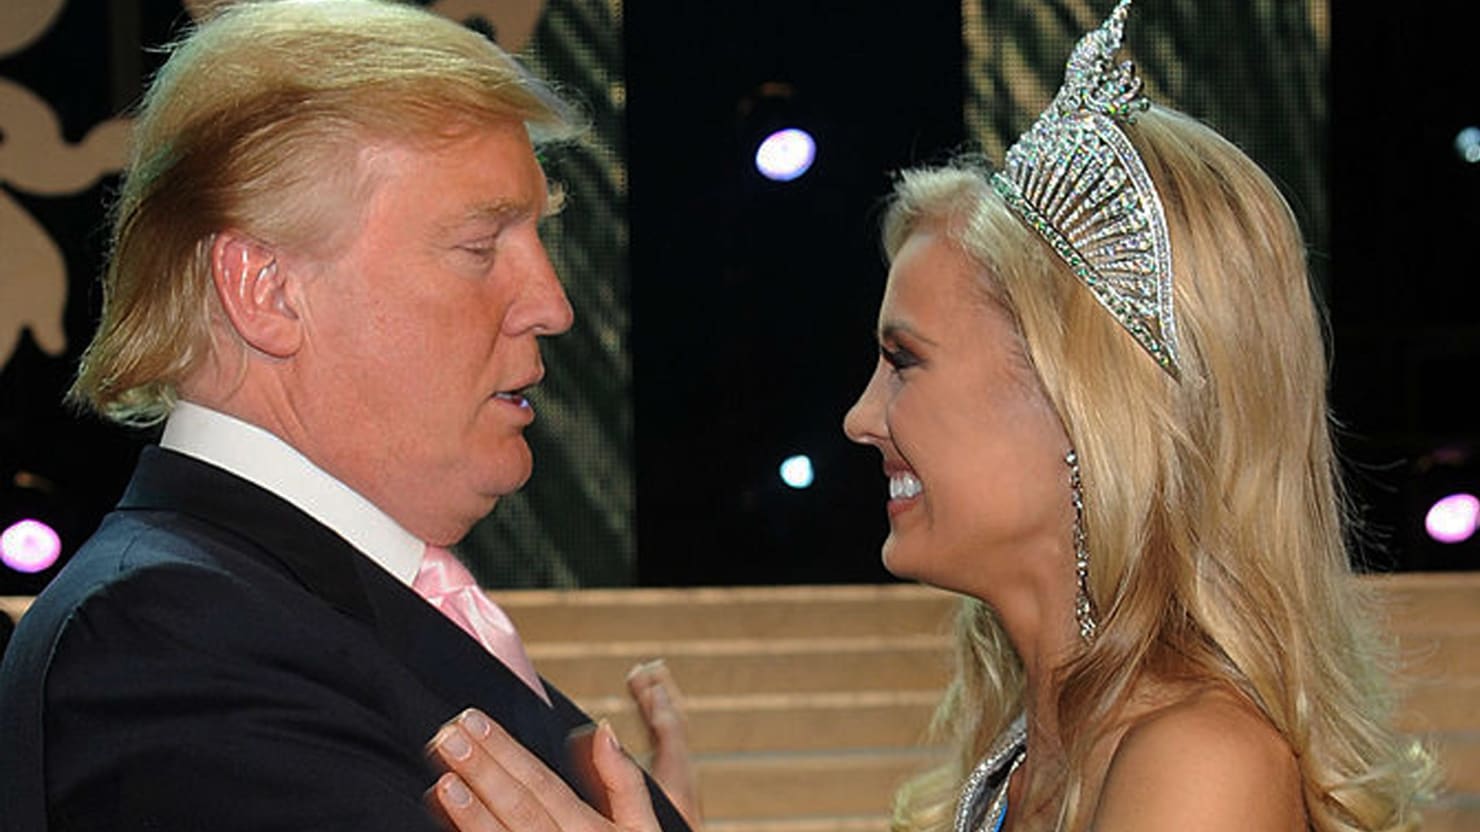 Image result for trump and beauty queens